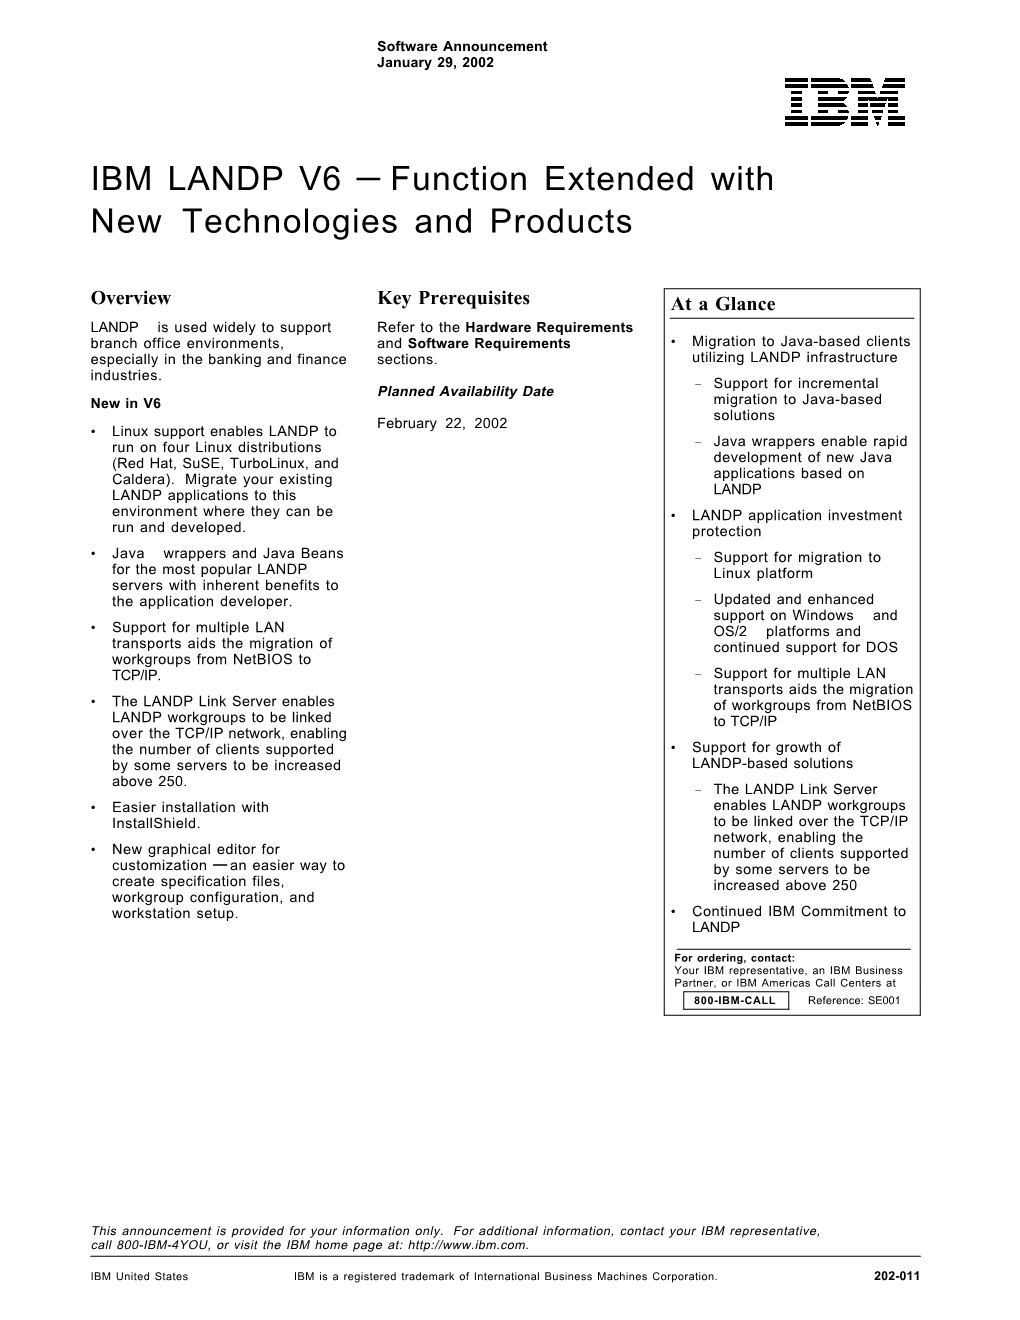 IBM LANDP V6 — Function Extended with New Technologies and Products